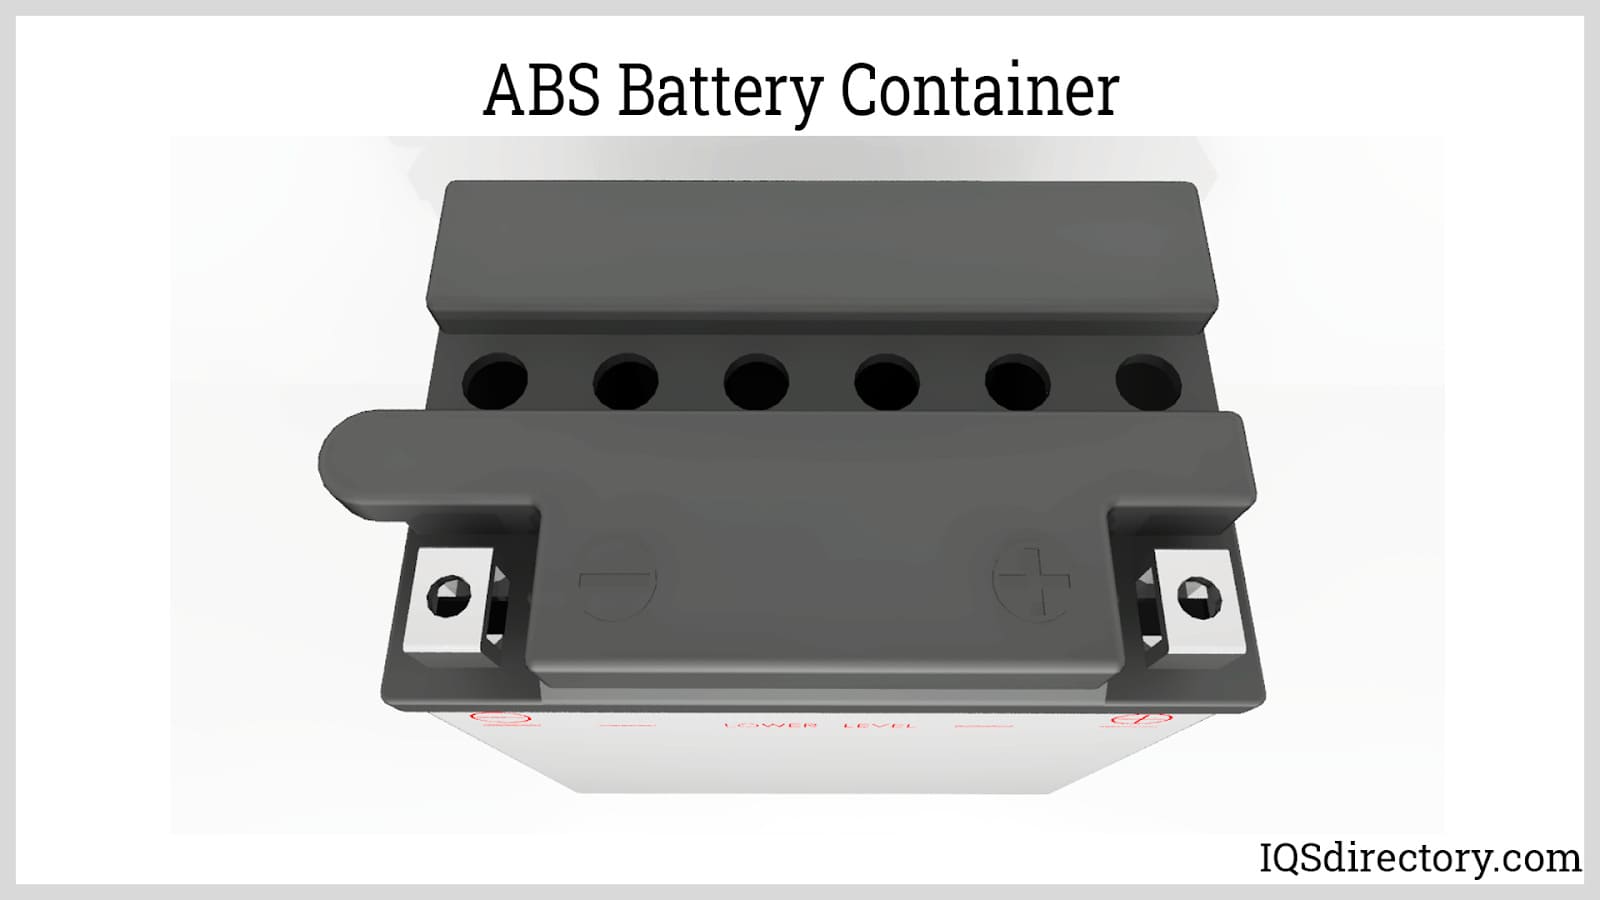 ABS Battery Container